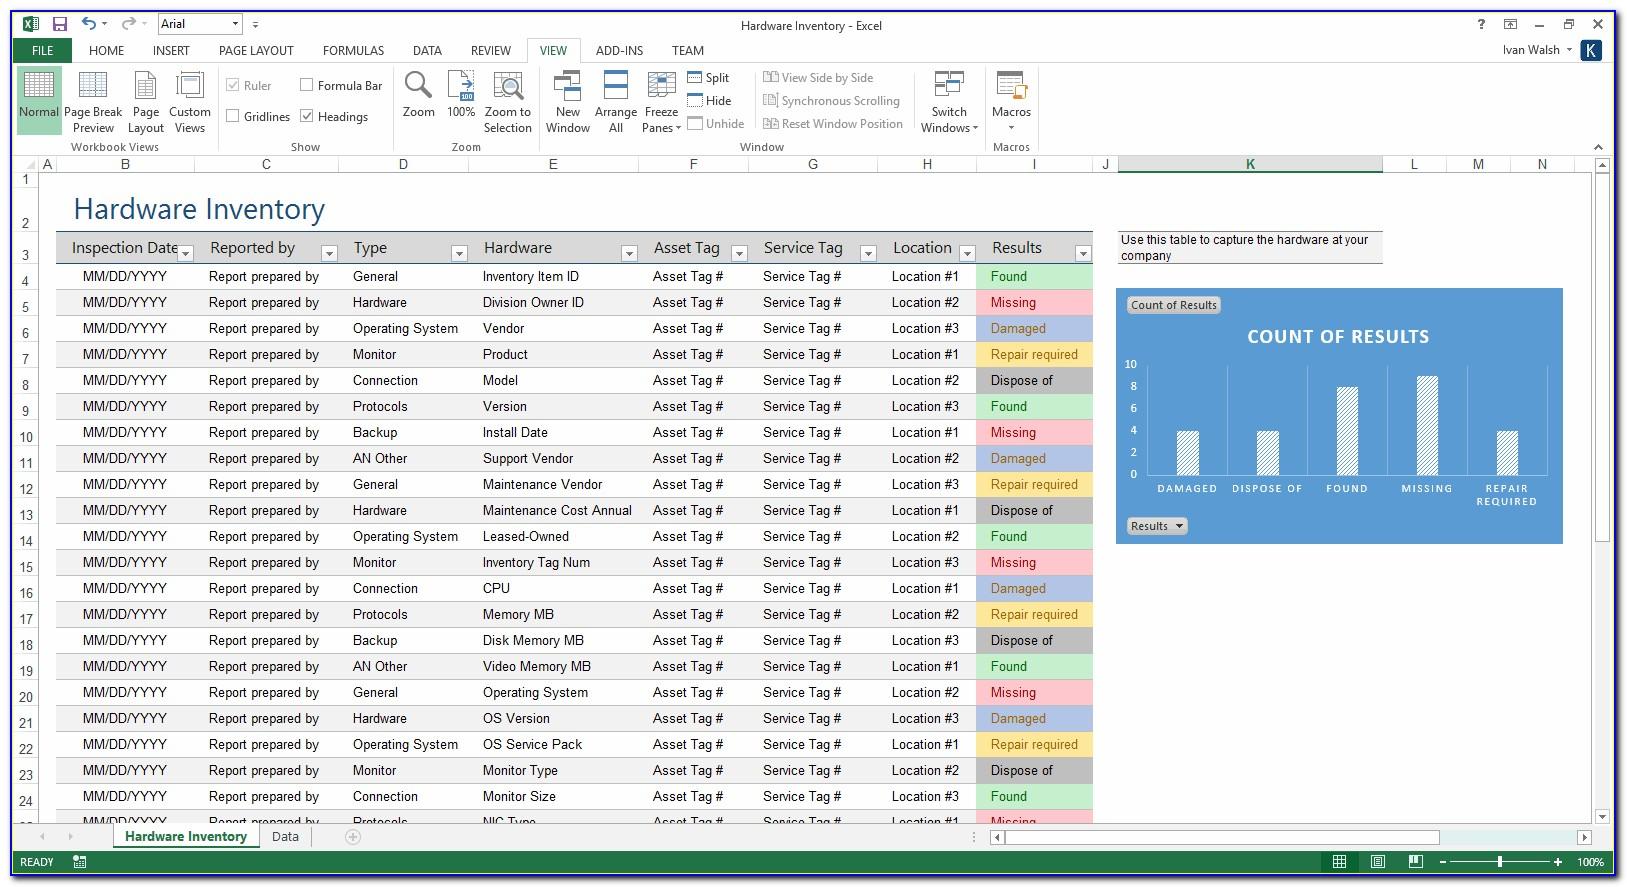 Server Capacity Planning Template Excel